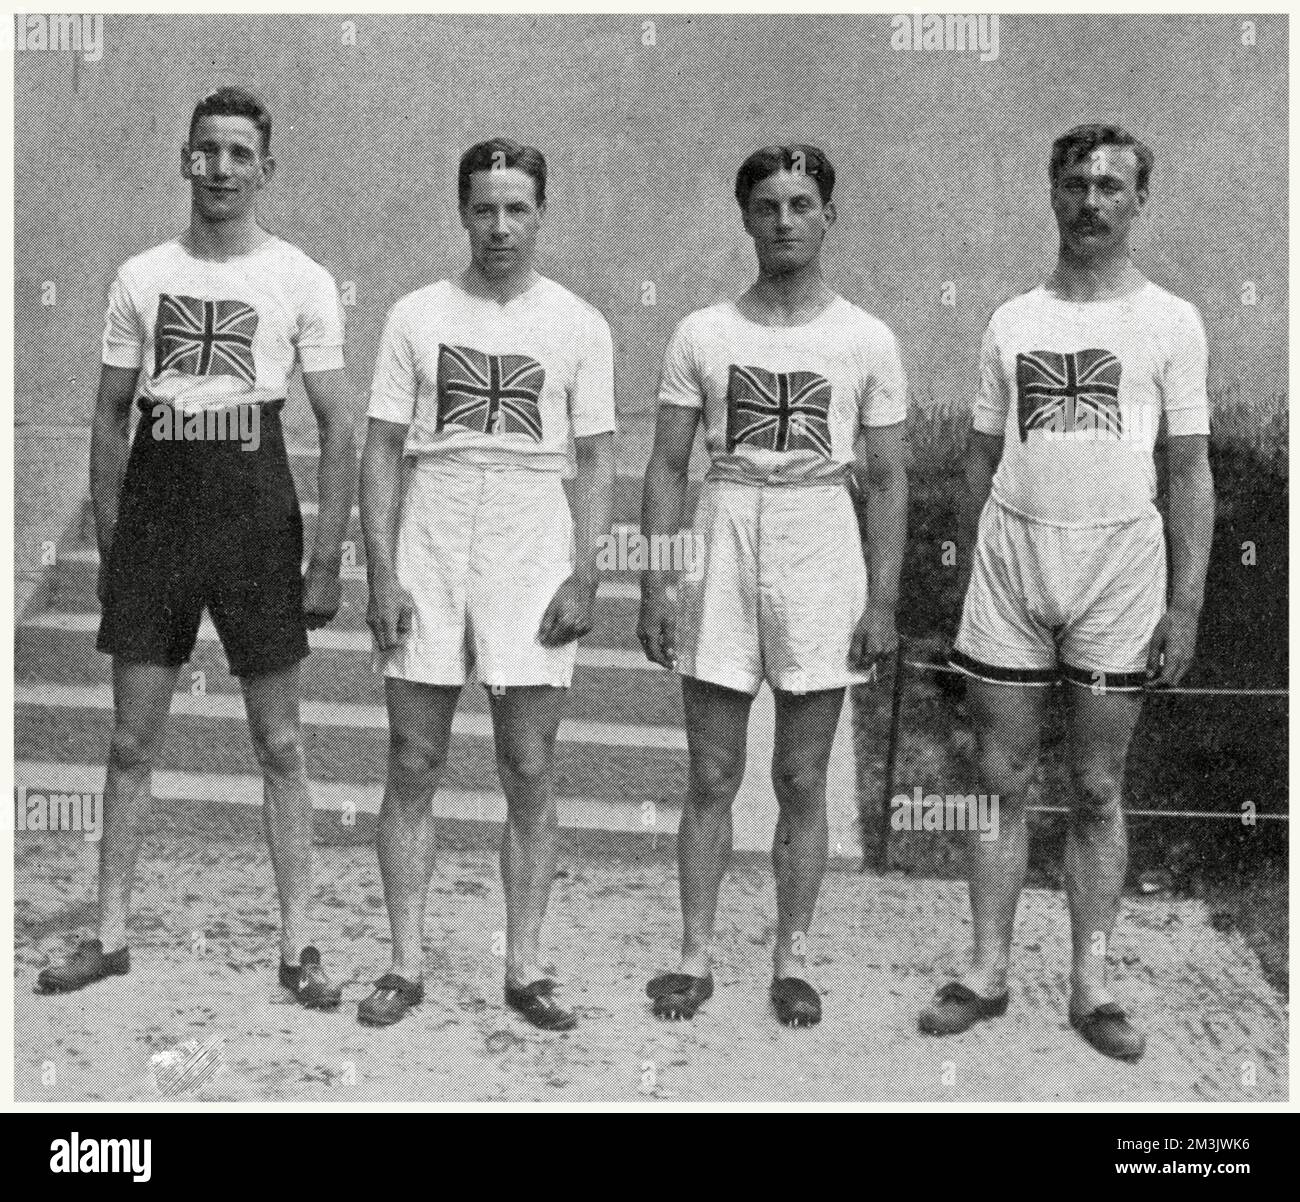 The English 4 x 100 metres relay team who won gold medals at the Stockholm Olympics in 1912. From left to right: D. Jacobs, H. M. Macintosh, W. R. Applegarth and V. D'Arcy. Note the high-waisted shorts and T-shirts emblazoned with a Union Jack. Stock Photo